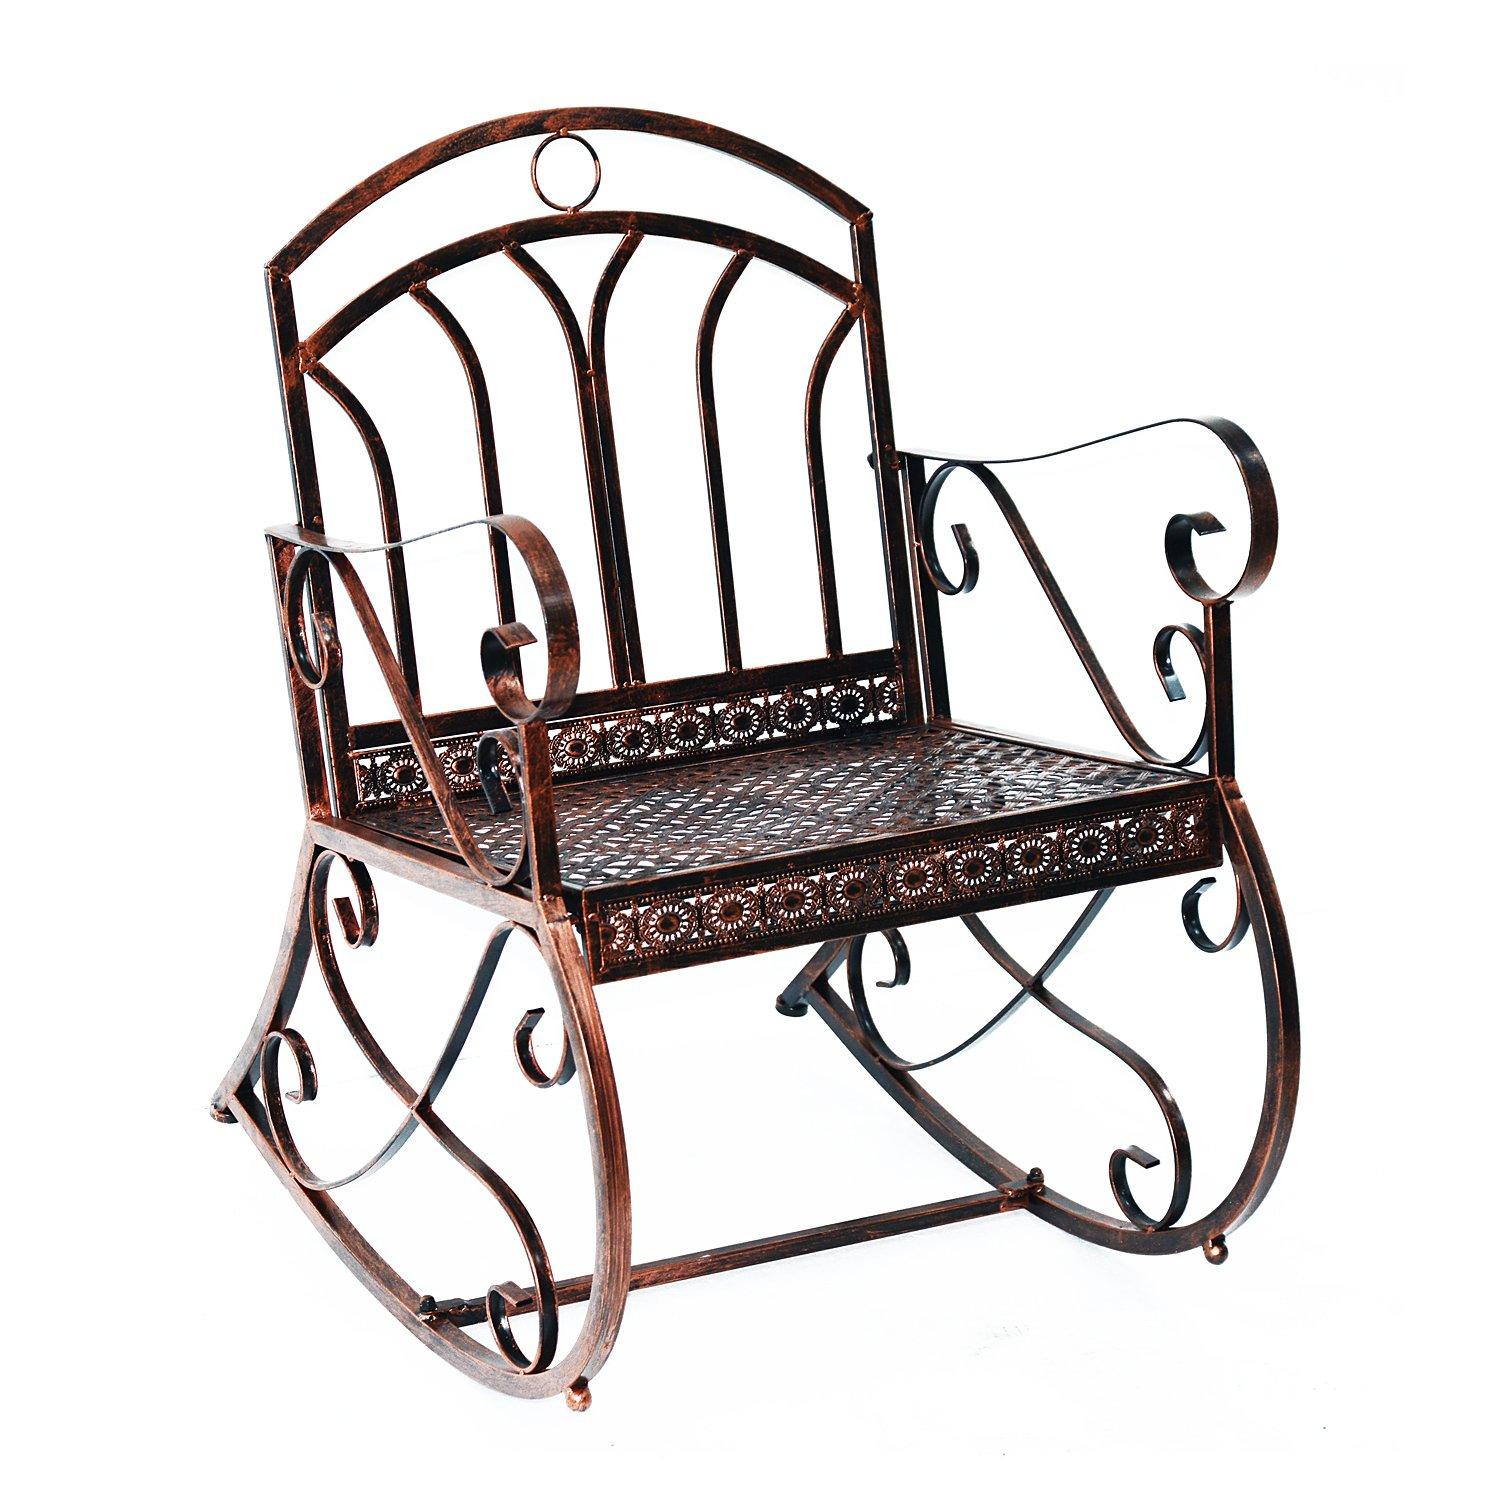 Rocking Chair Outdoor Metal Vintage Style Garden Seat for Patio